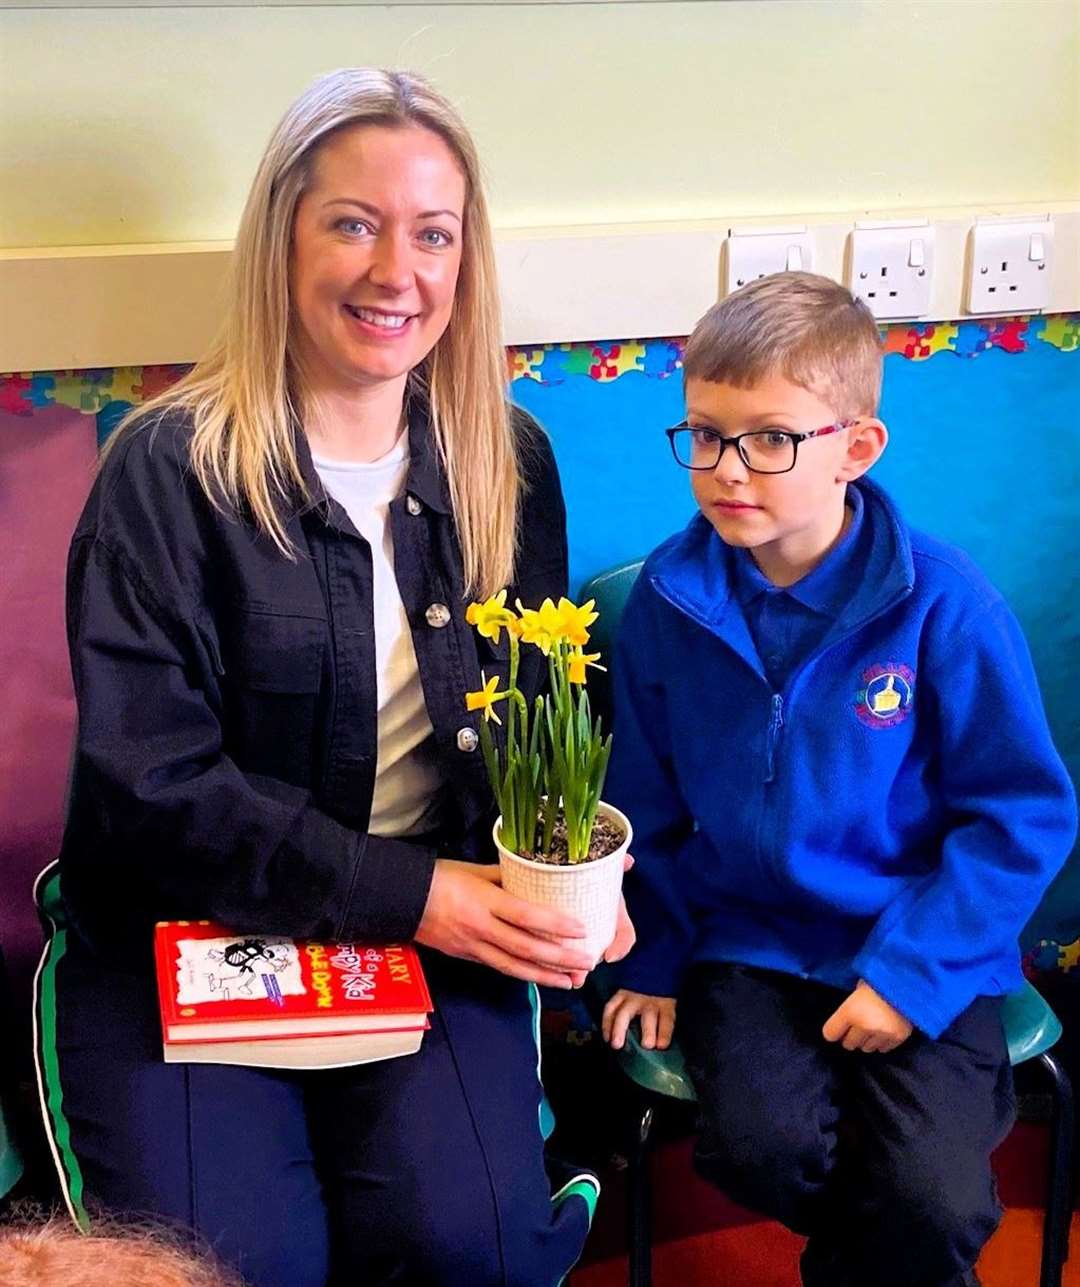 The pupils also gave each reader some daffodils as a thank-you for coming in to read to them.